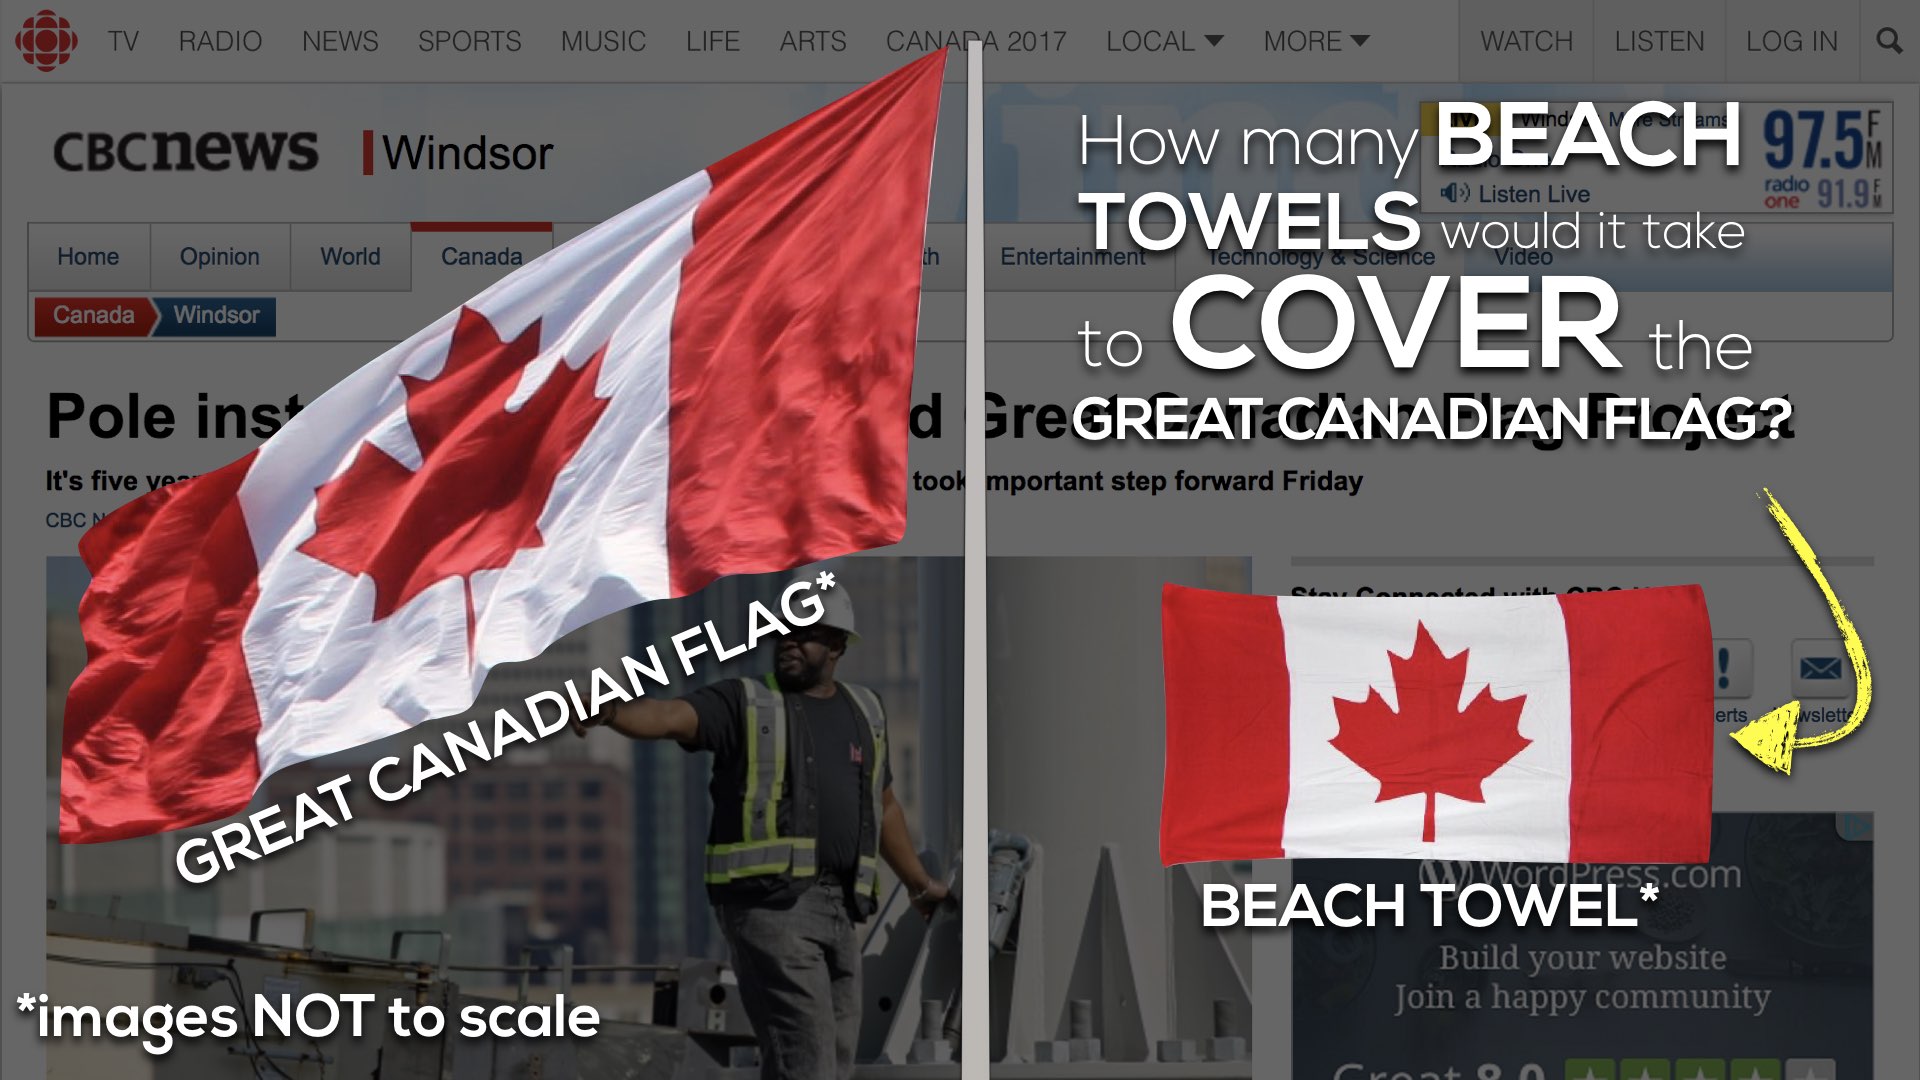 Act 1 - How Many Beach Towels Would It Take to Cover the Great Canadian Flag?